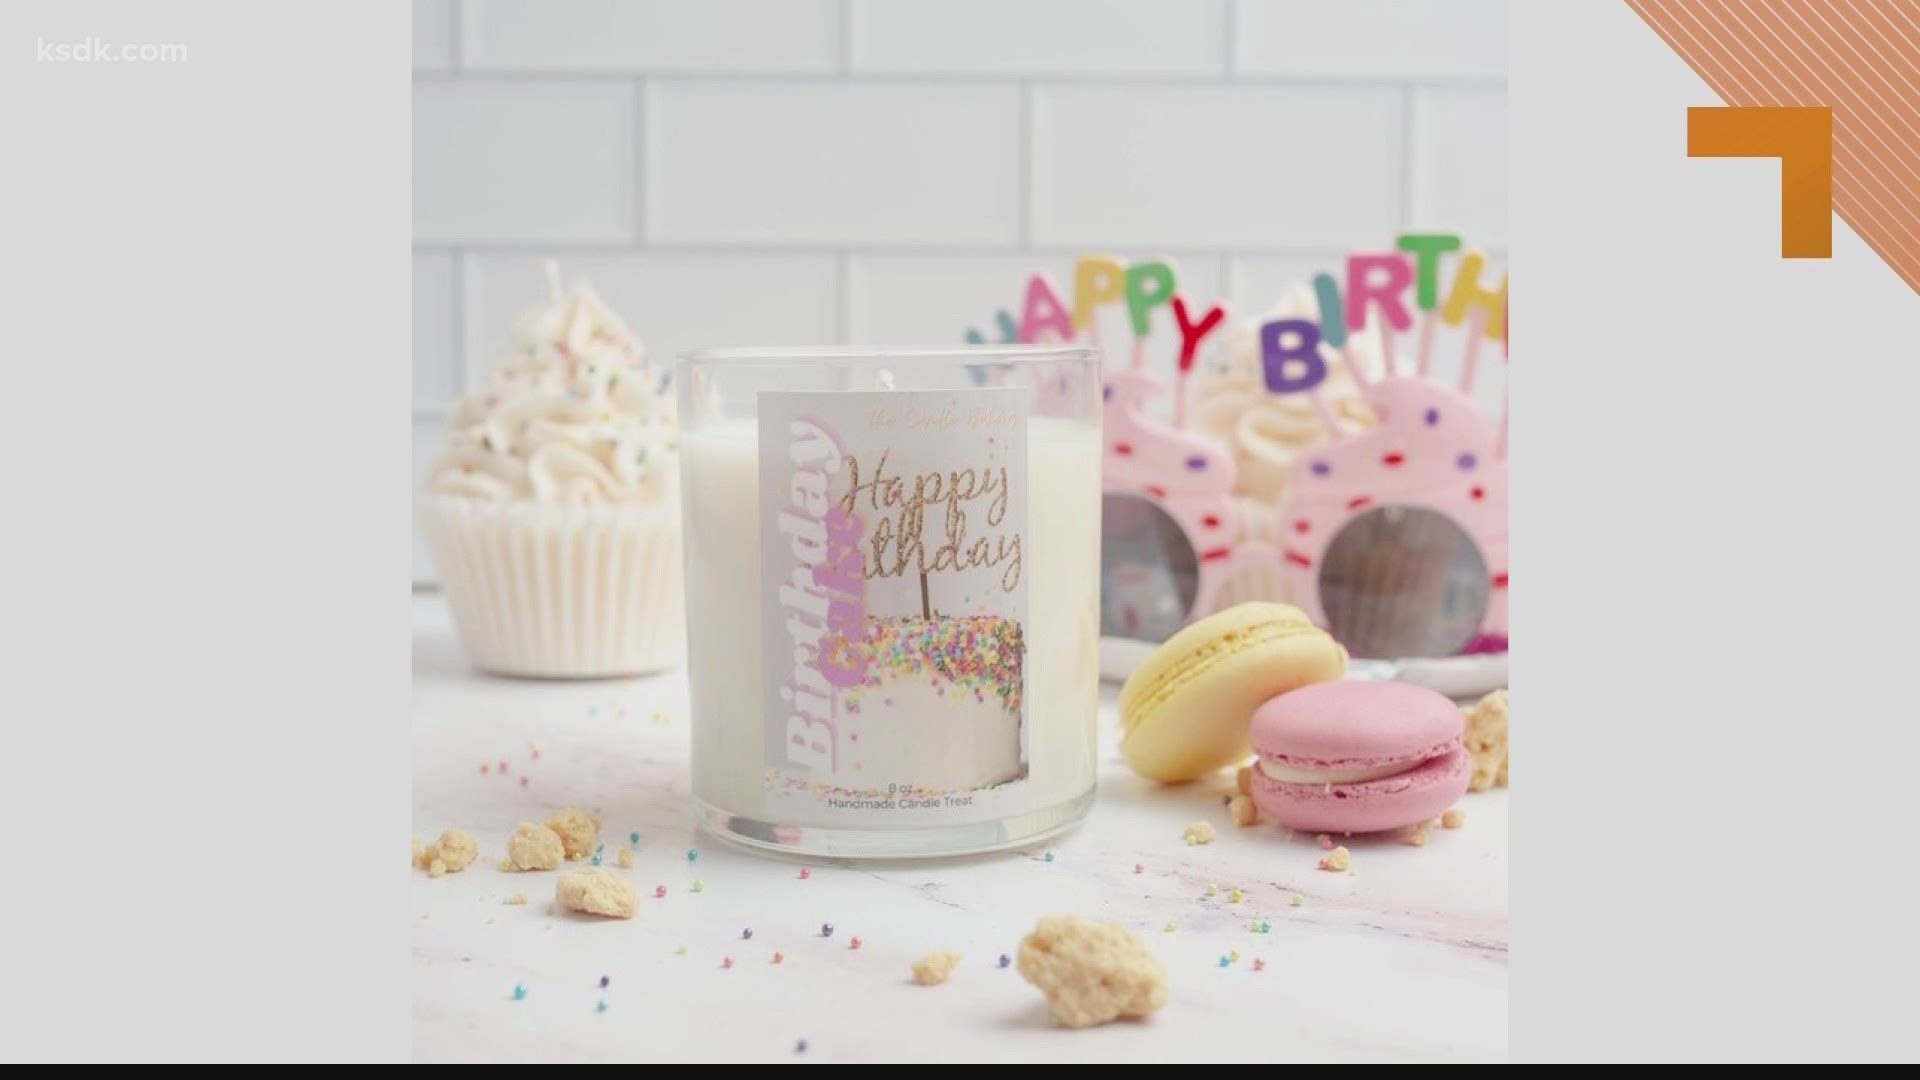 She offers jar candles, along with soy candles and wax melts that look and smell like cupcakes, parfaits, cookies, pastries and more.